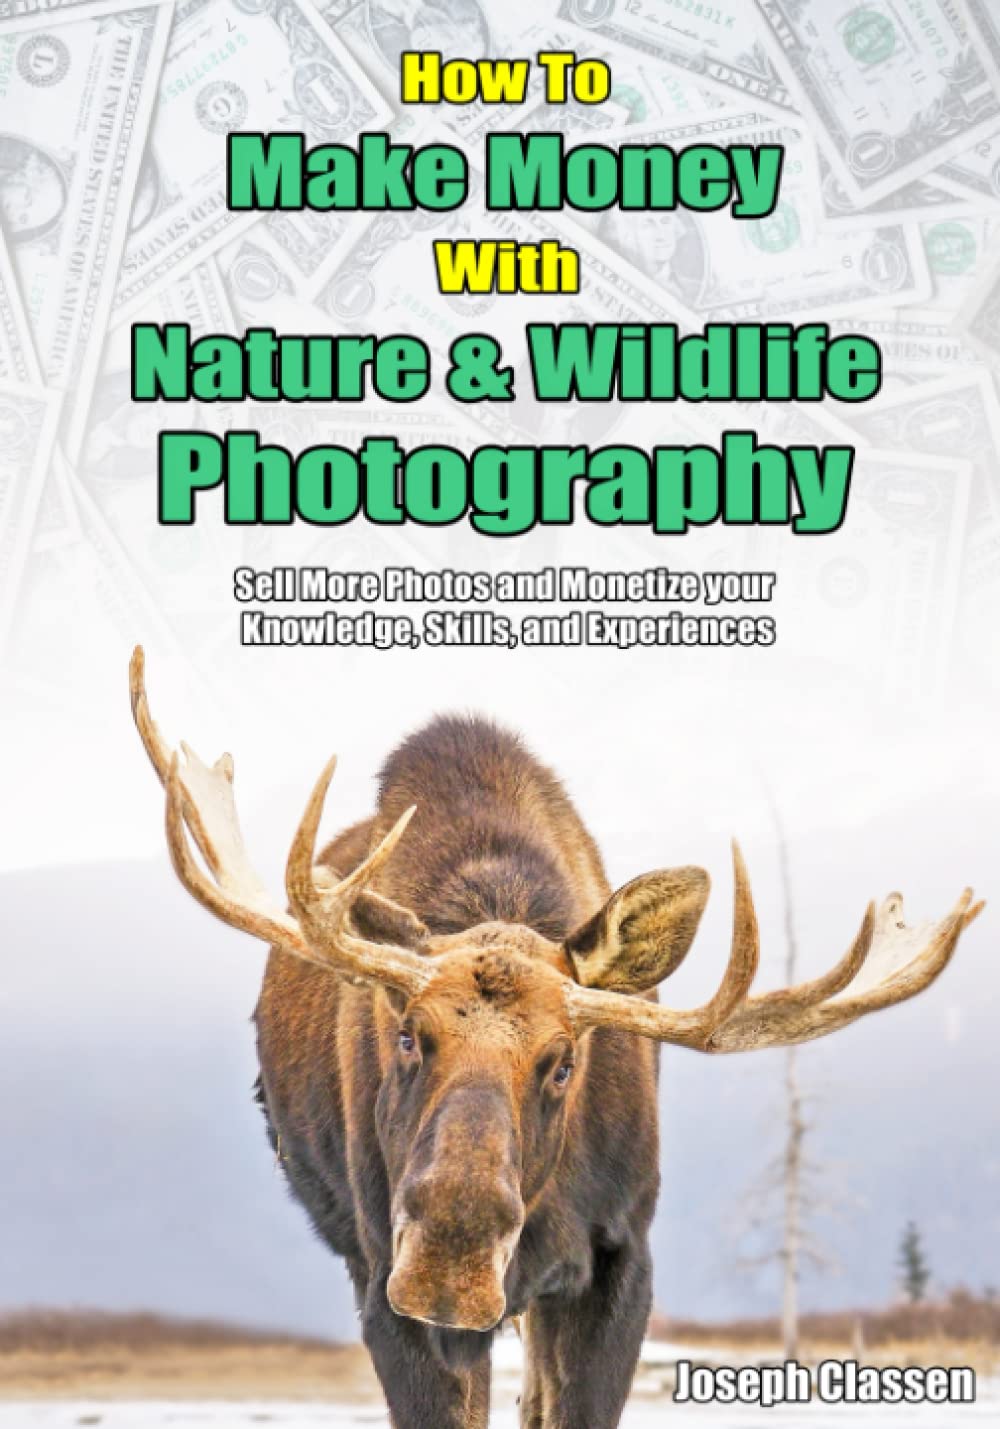 How to Make Money with Nature and Wildlife Photography: Sell More Photos and Monetize your Knowledge, Skills, and Experiences